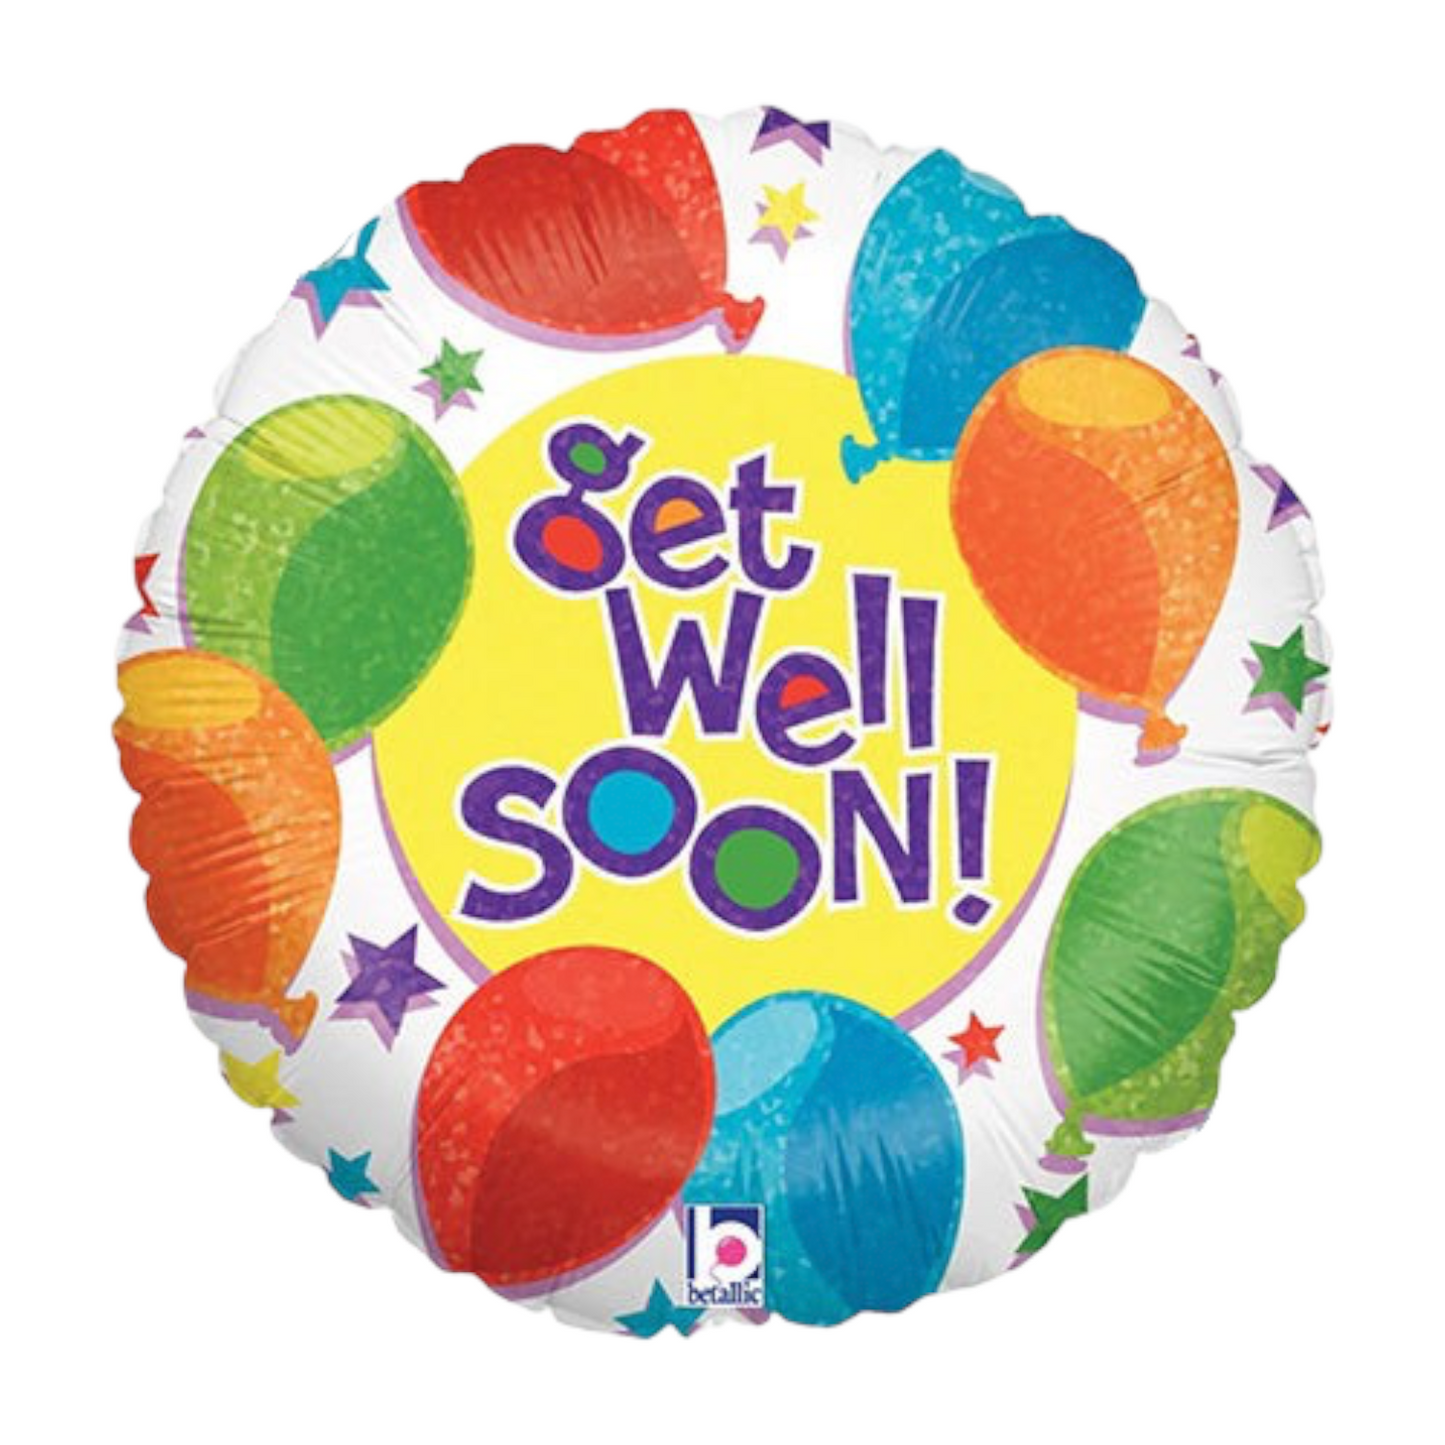 Get Well Soon Balloon - Colourful Balloons and Stars